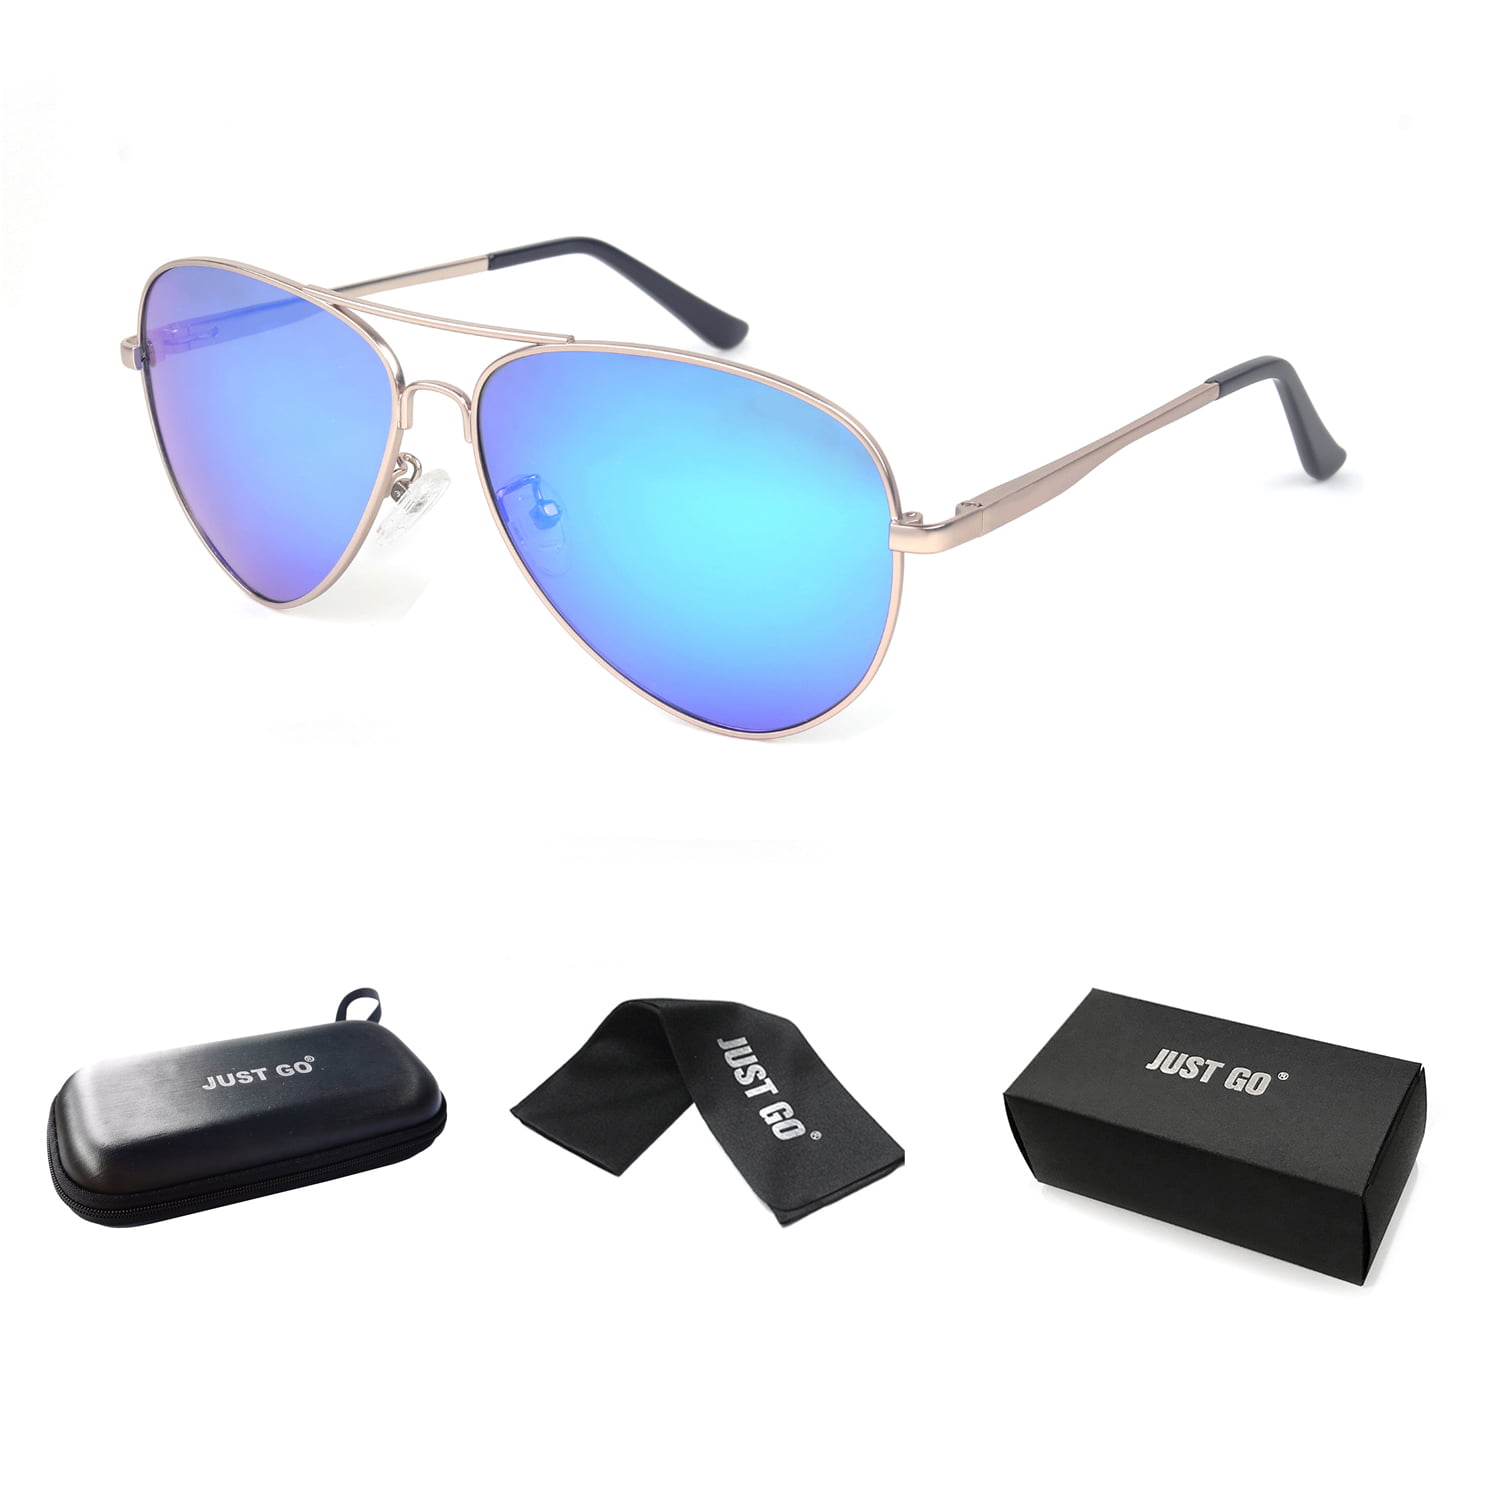 JUST GO Metal Frame UV Lenses, 100% Vintage Polarized Style Gold, Matte Aviator Protection, Revo Case, with Sunglasses Blue